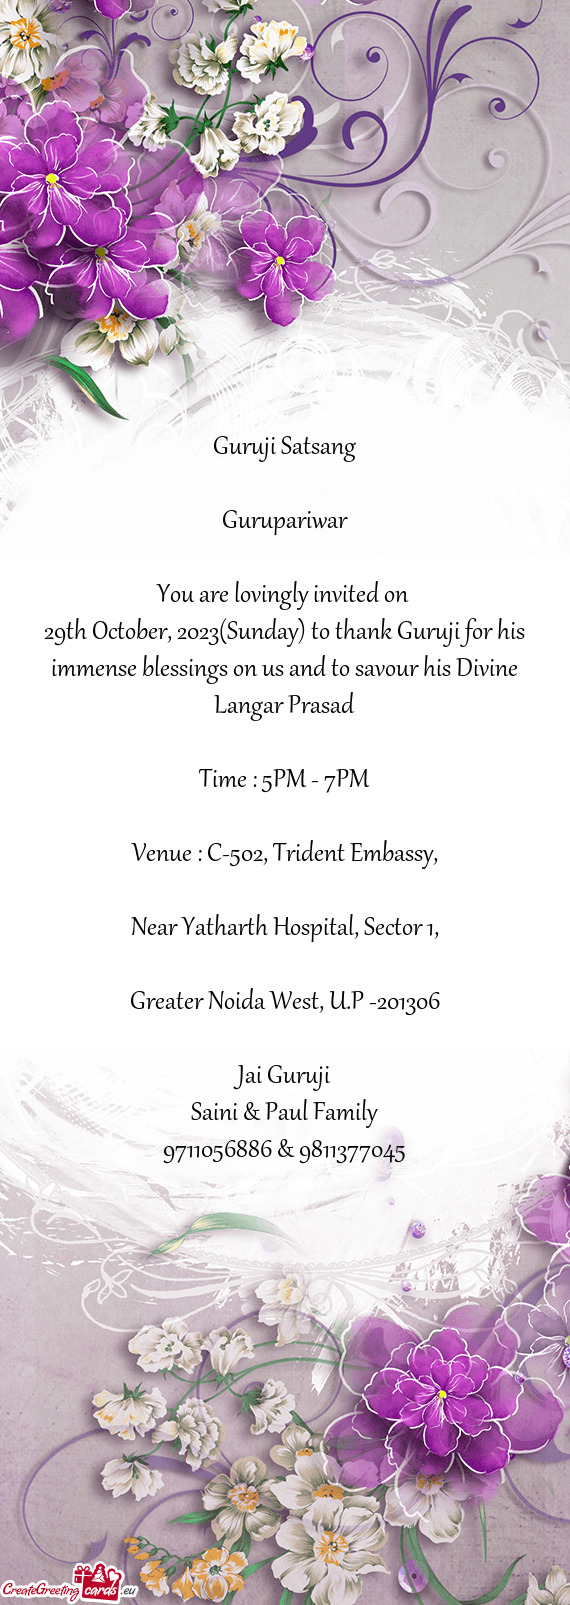 29th October, 2023(Sunday) to thank Guruji for his immense blessings on us and to savour his Divine